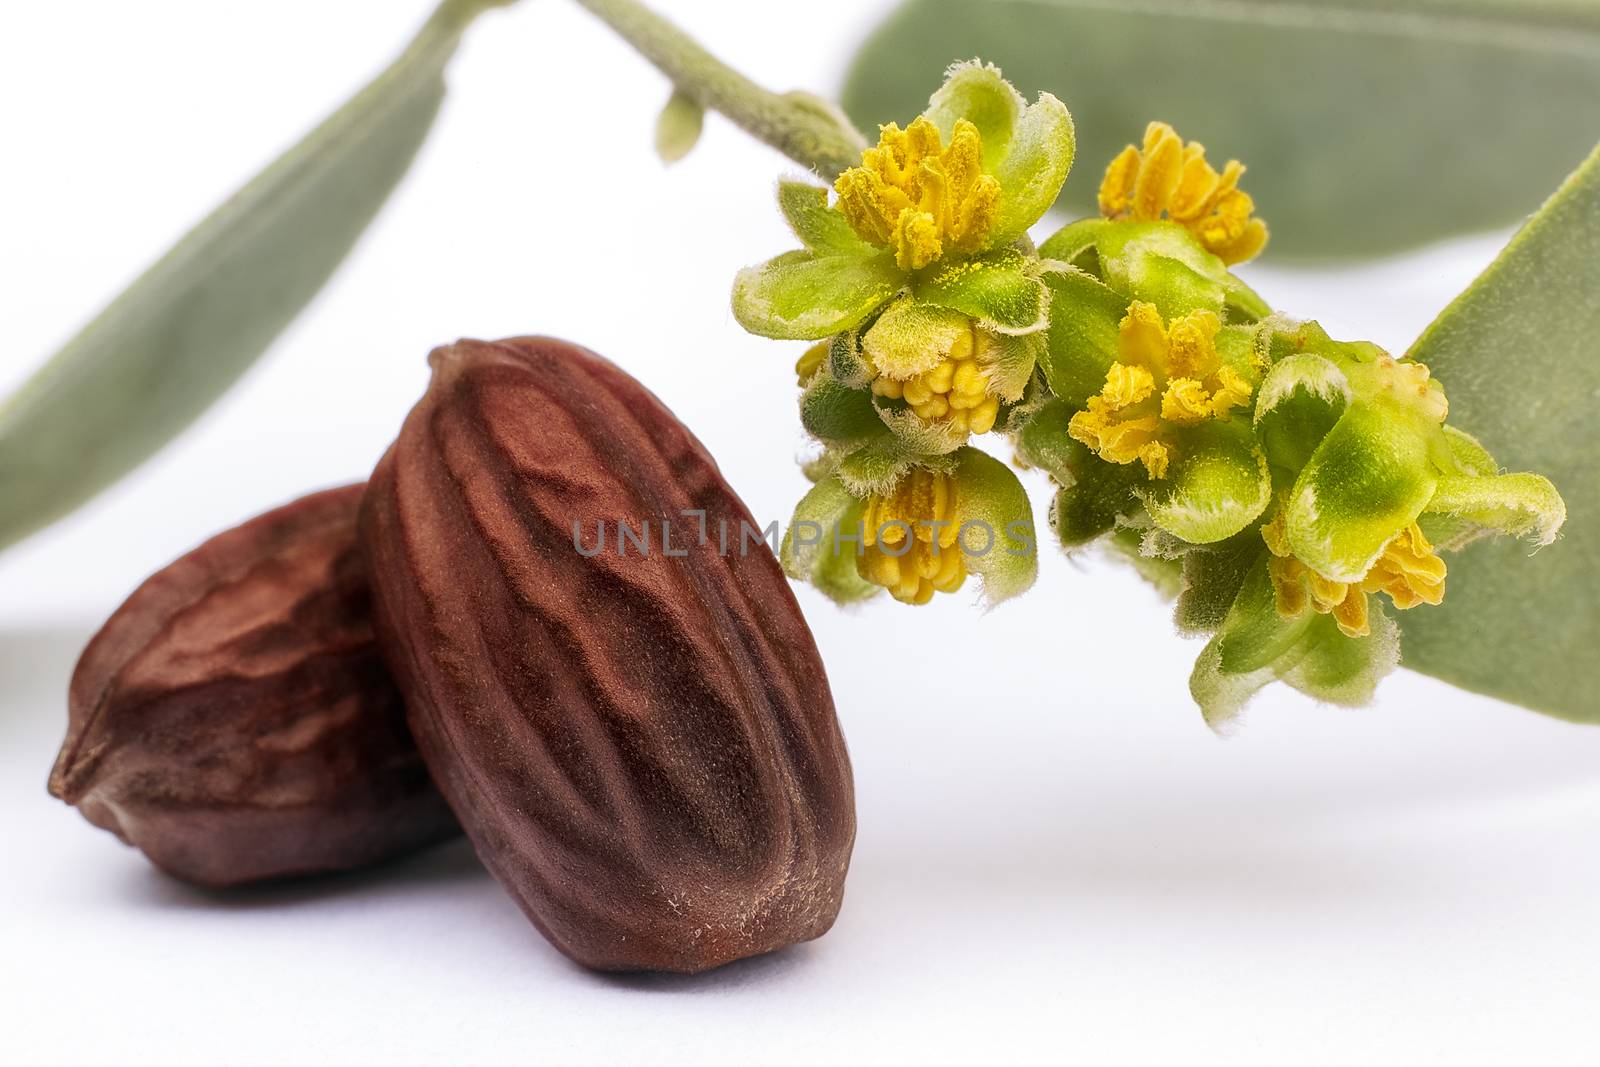 Jojoba (Simmondsia chinensis) flower, leaves and seeds isolated on withe beckground